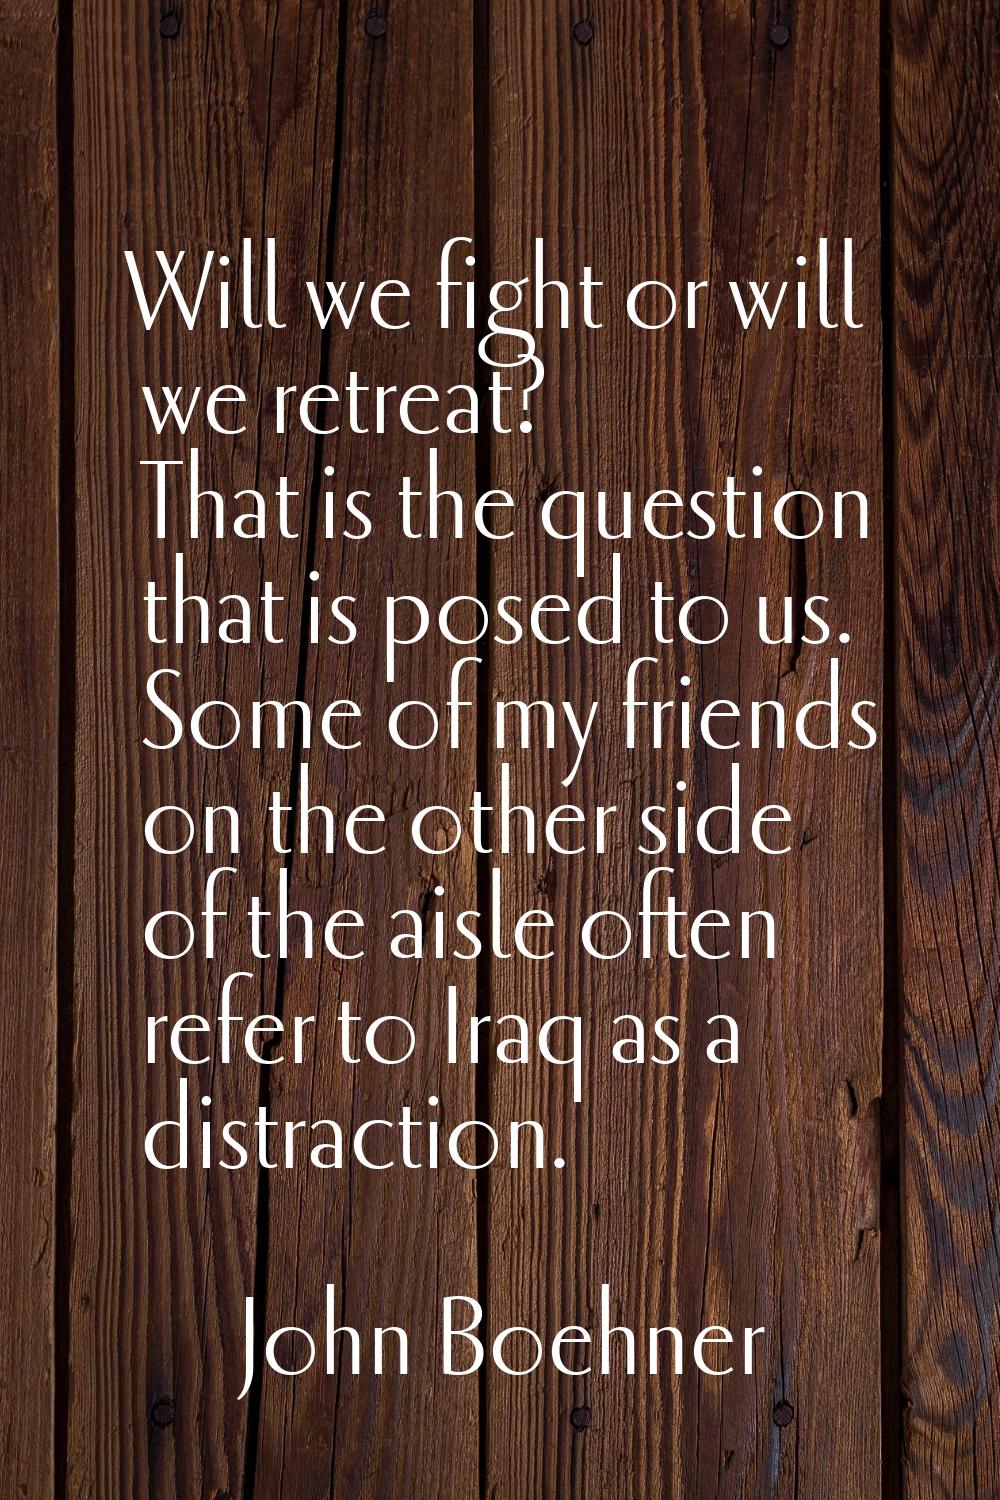 Will we fight or will we retreat? That is the question that is posed to us. Some of my friends on t